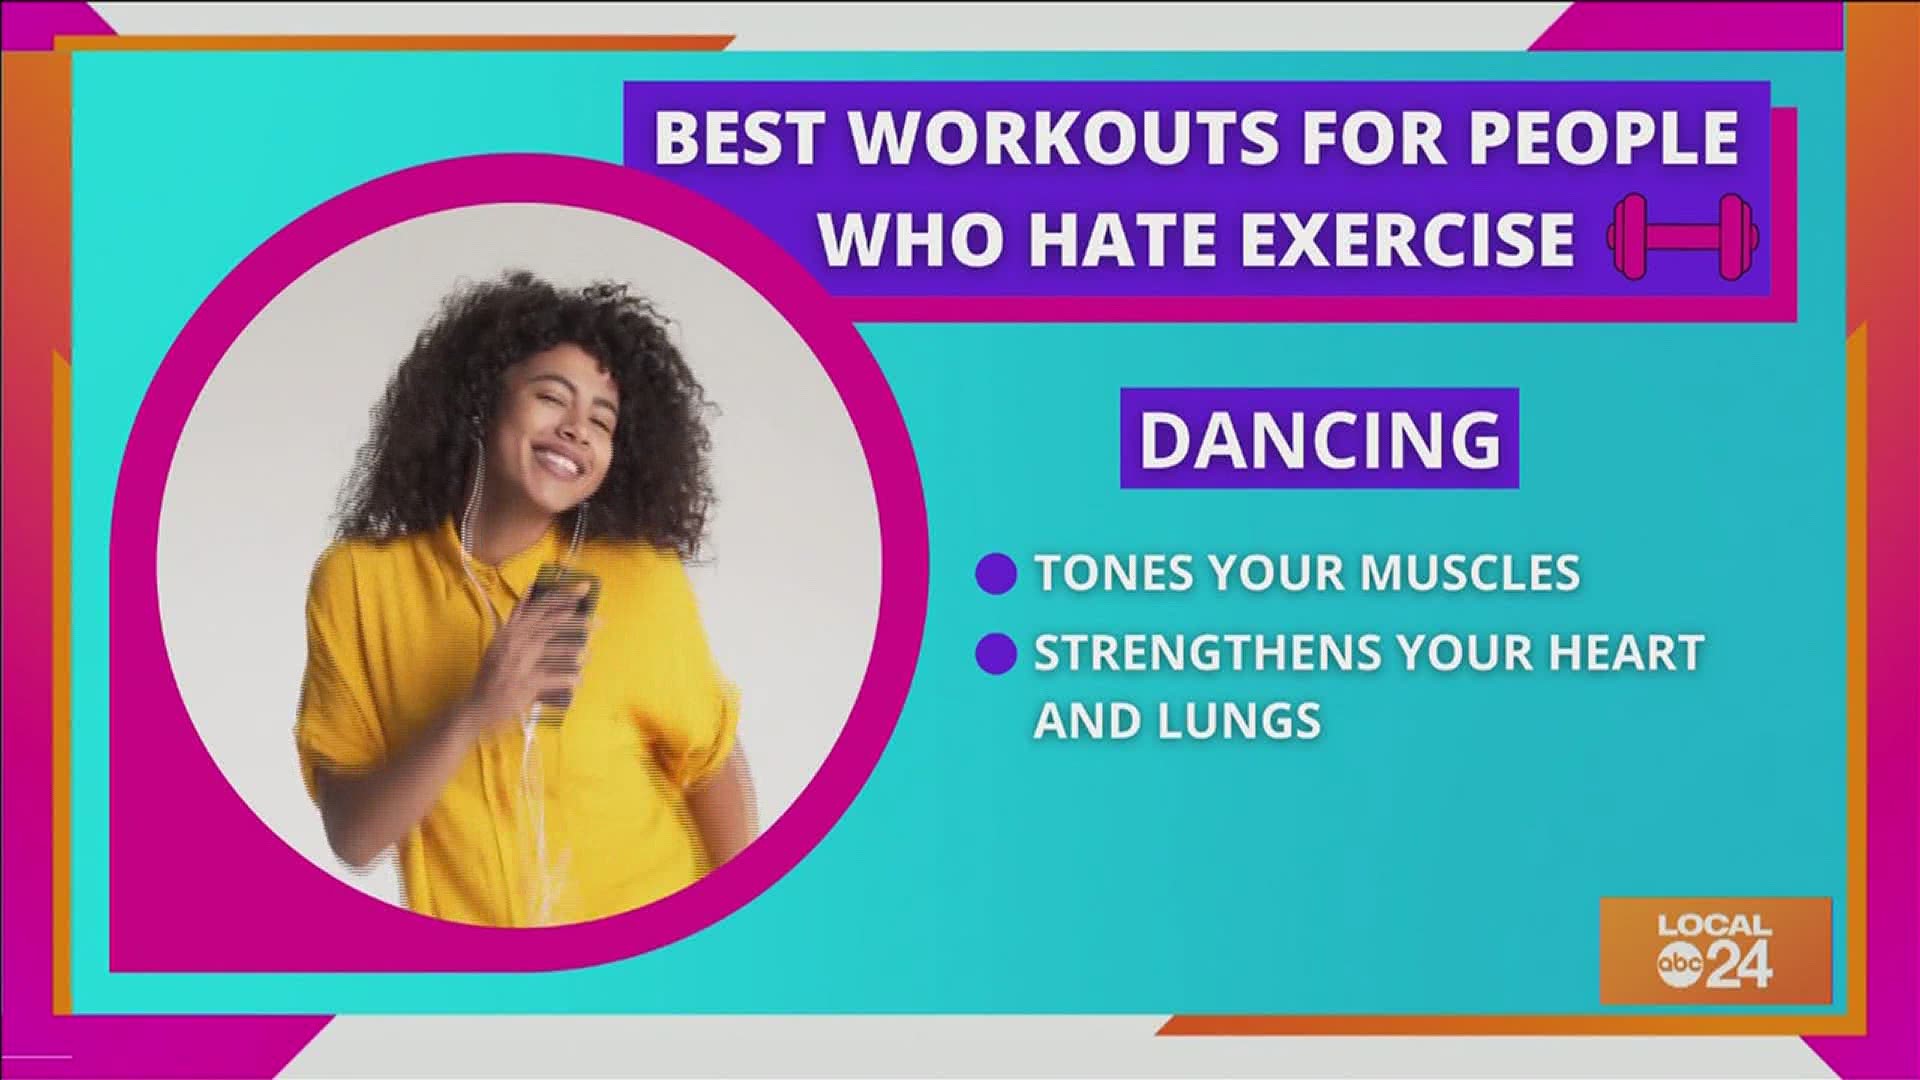 Looking to loose weight, but don't feel like going to the gym? In that case, check out these 5 workouts for workout haters! Starring Sydney Neely on "The Shortcut!"